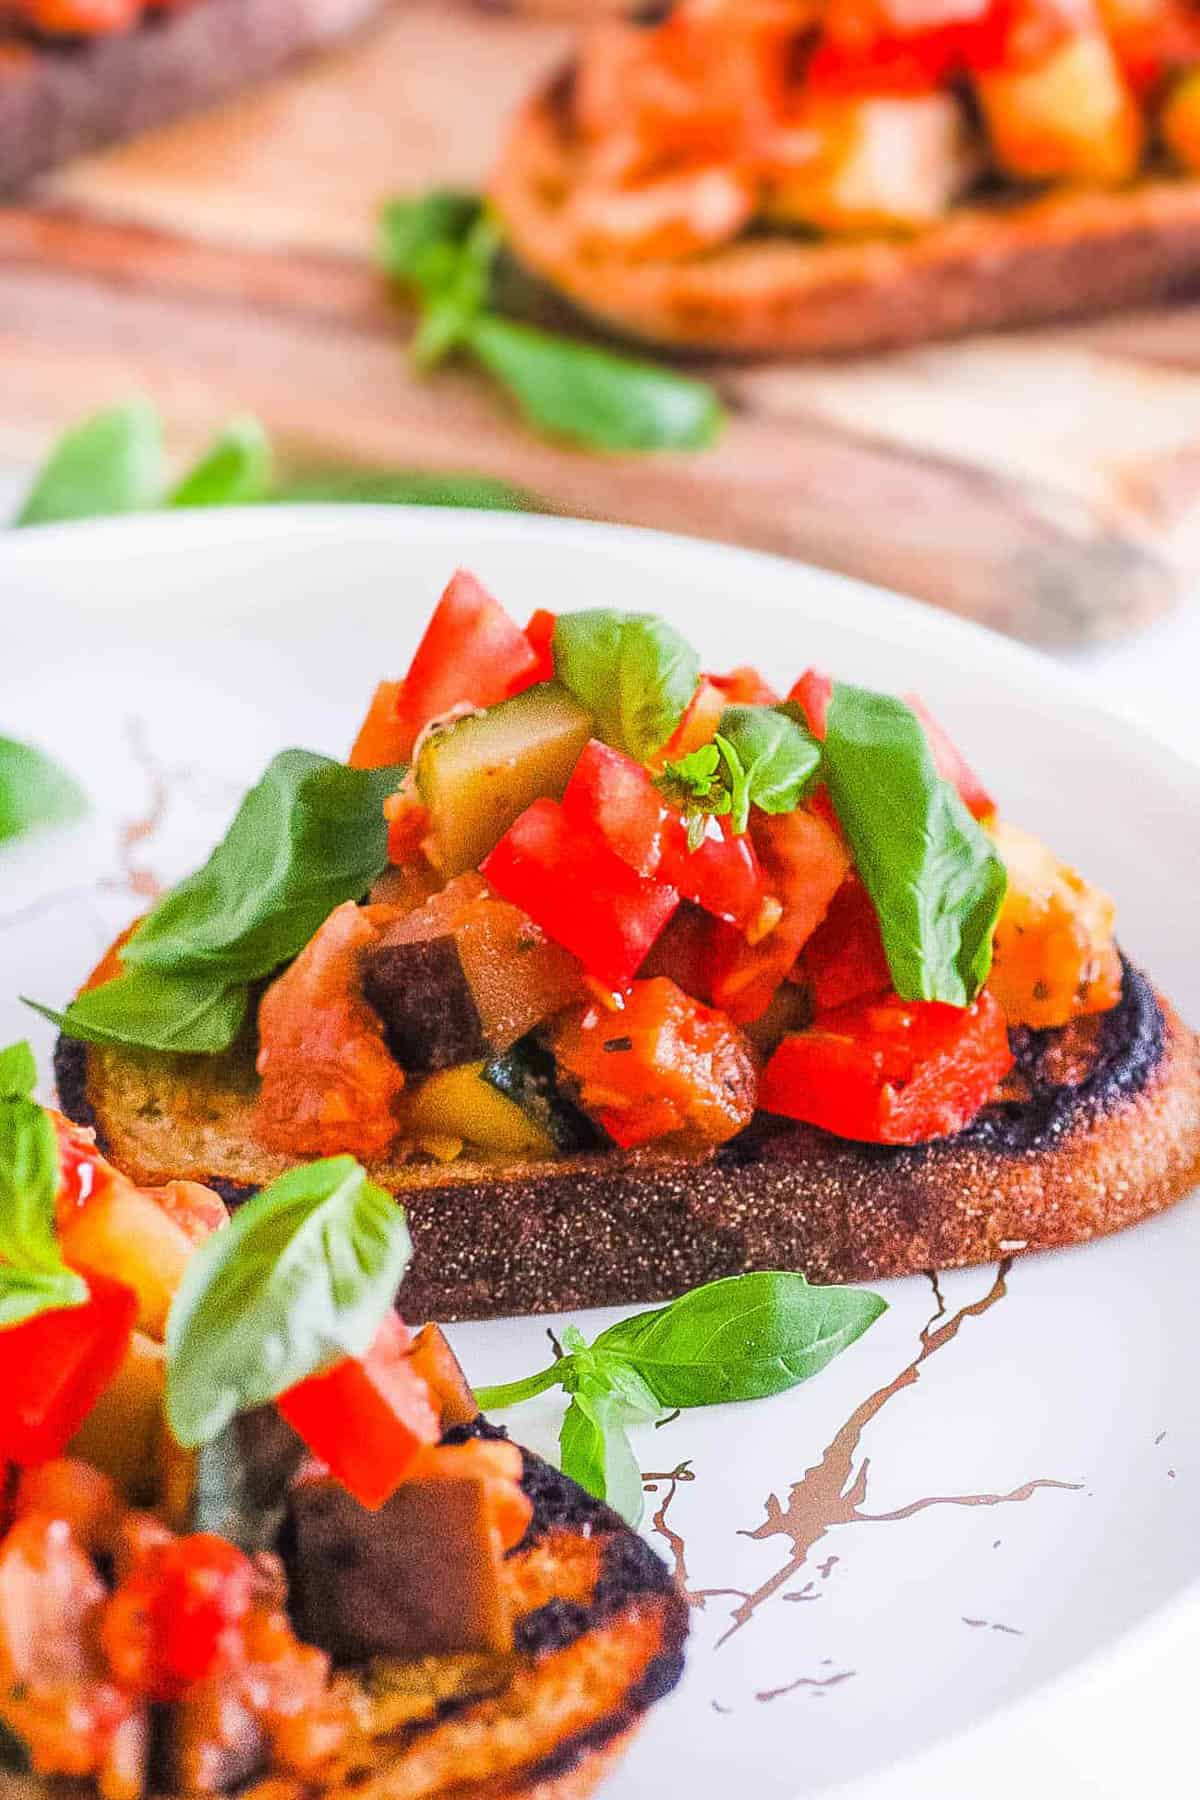 Vegan bruschetta with tomatoes and basil, served on a white plate.